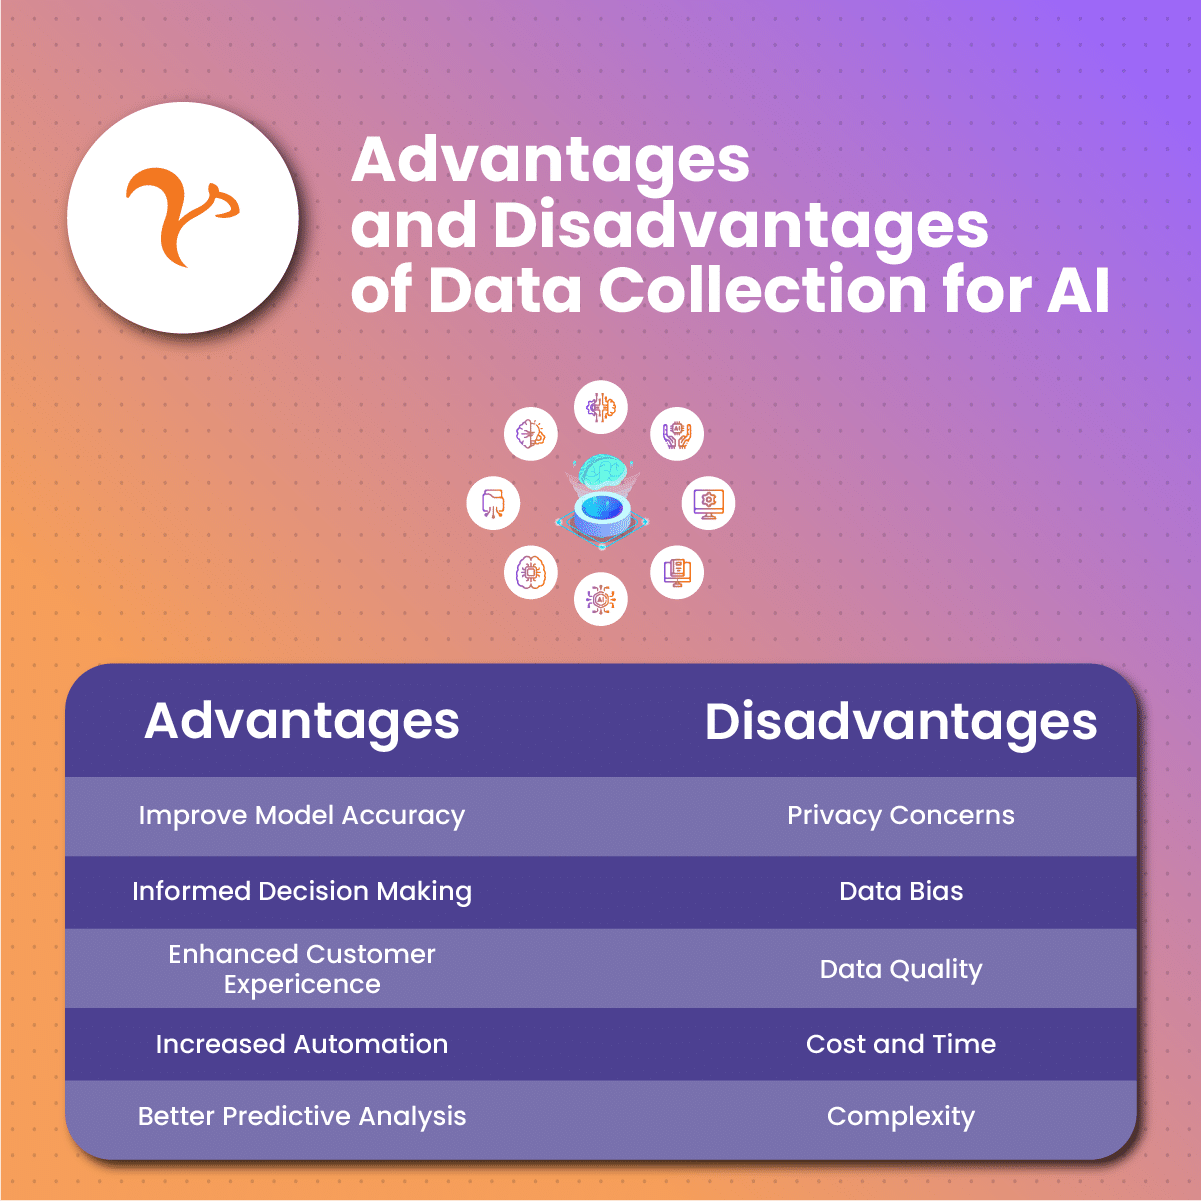 Advantages and Disadvantages of Data Collection for AI